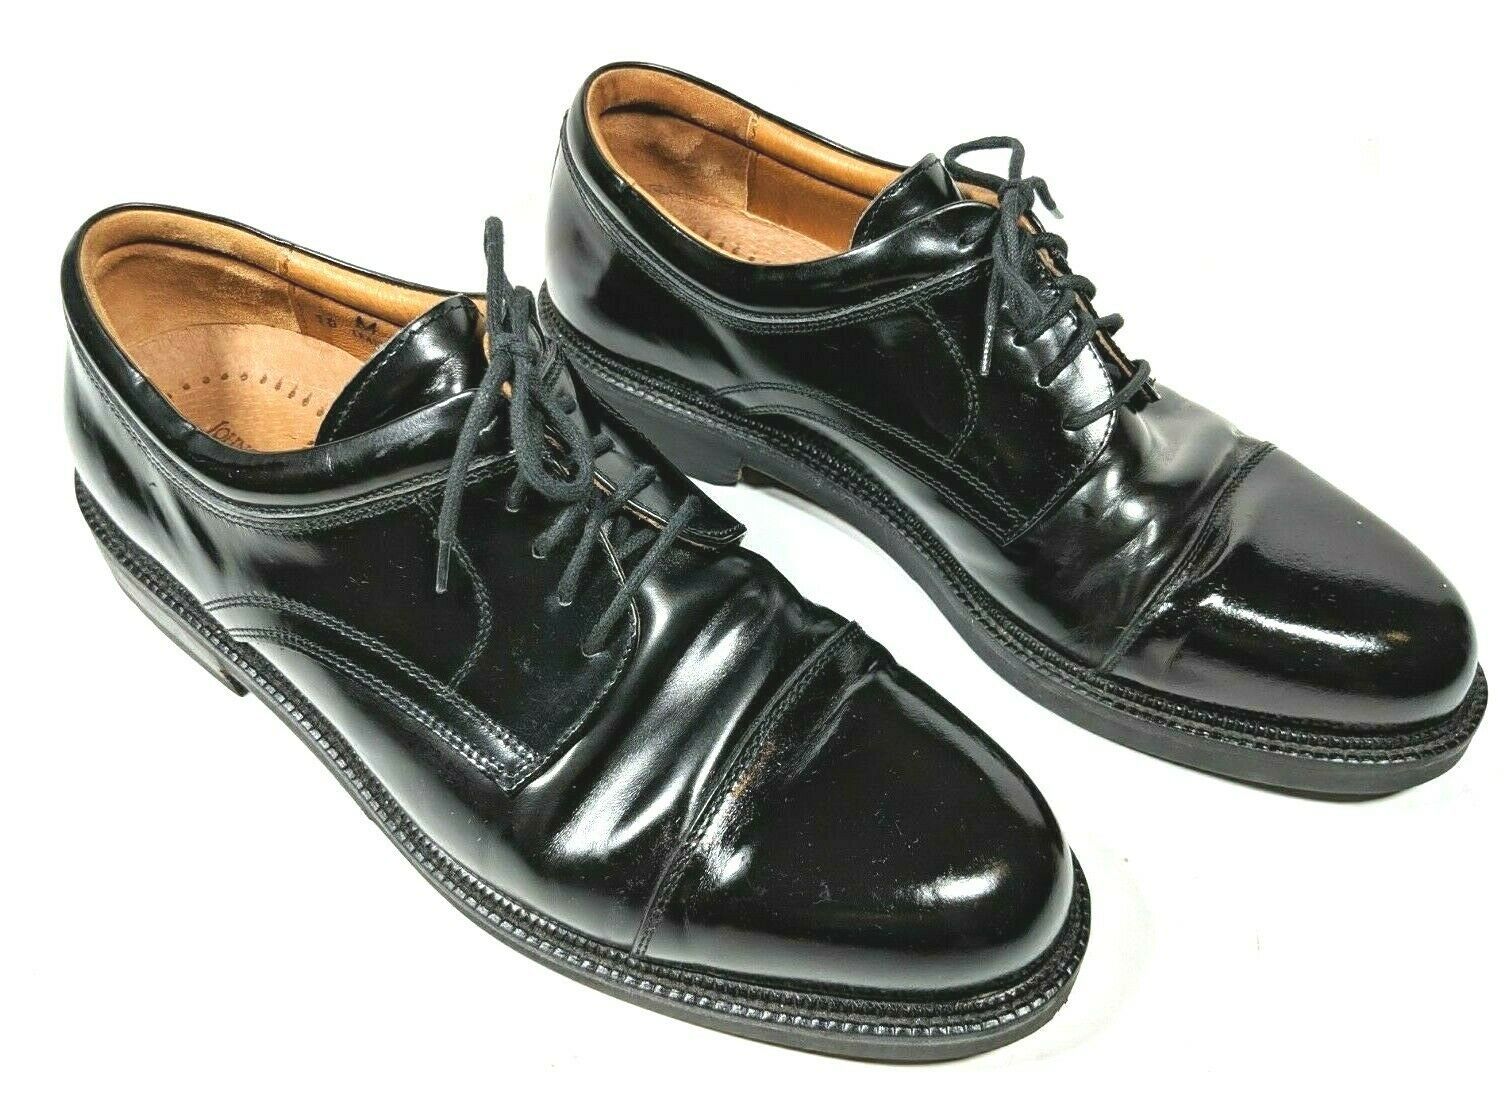 Primary image for Johnston & Murphy Passport Cap Toe Derby Mens 10 M Black Leather Shoes Italy J&M